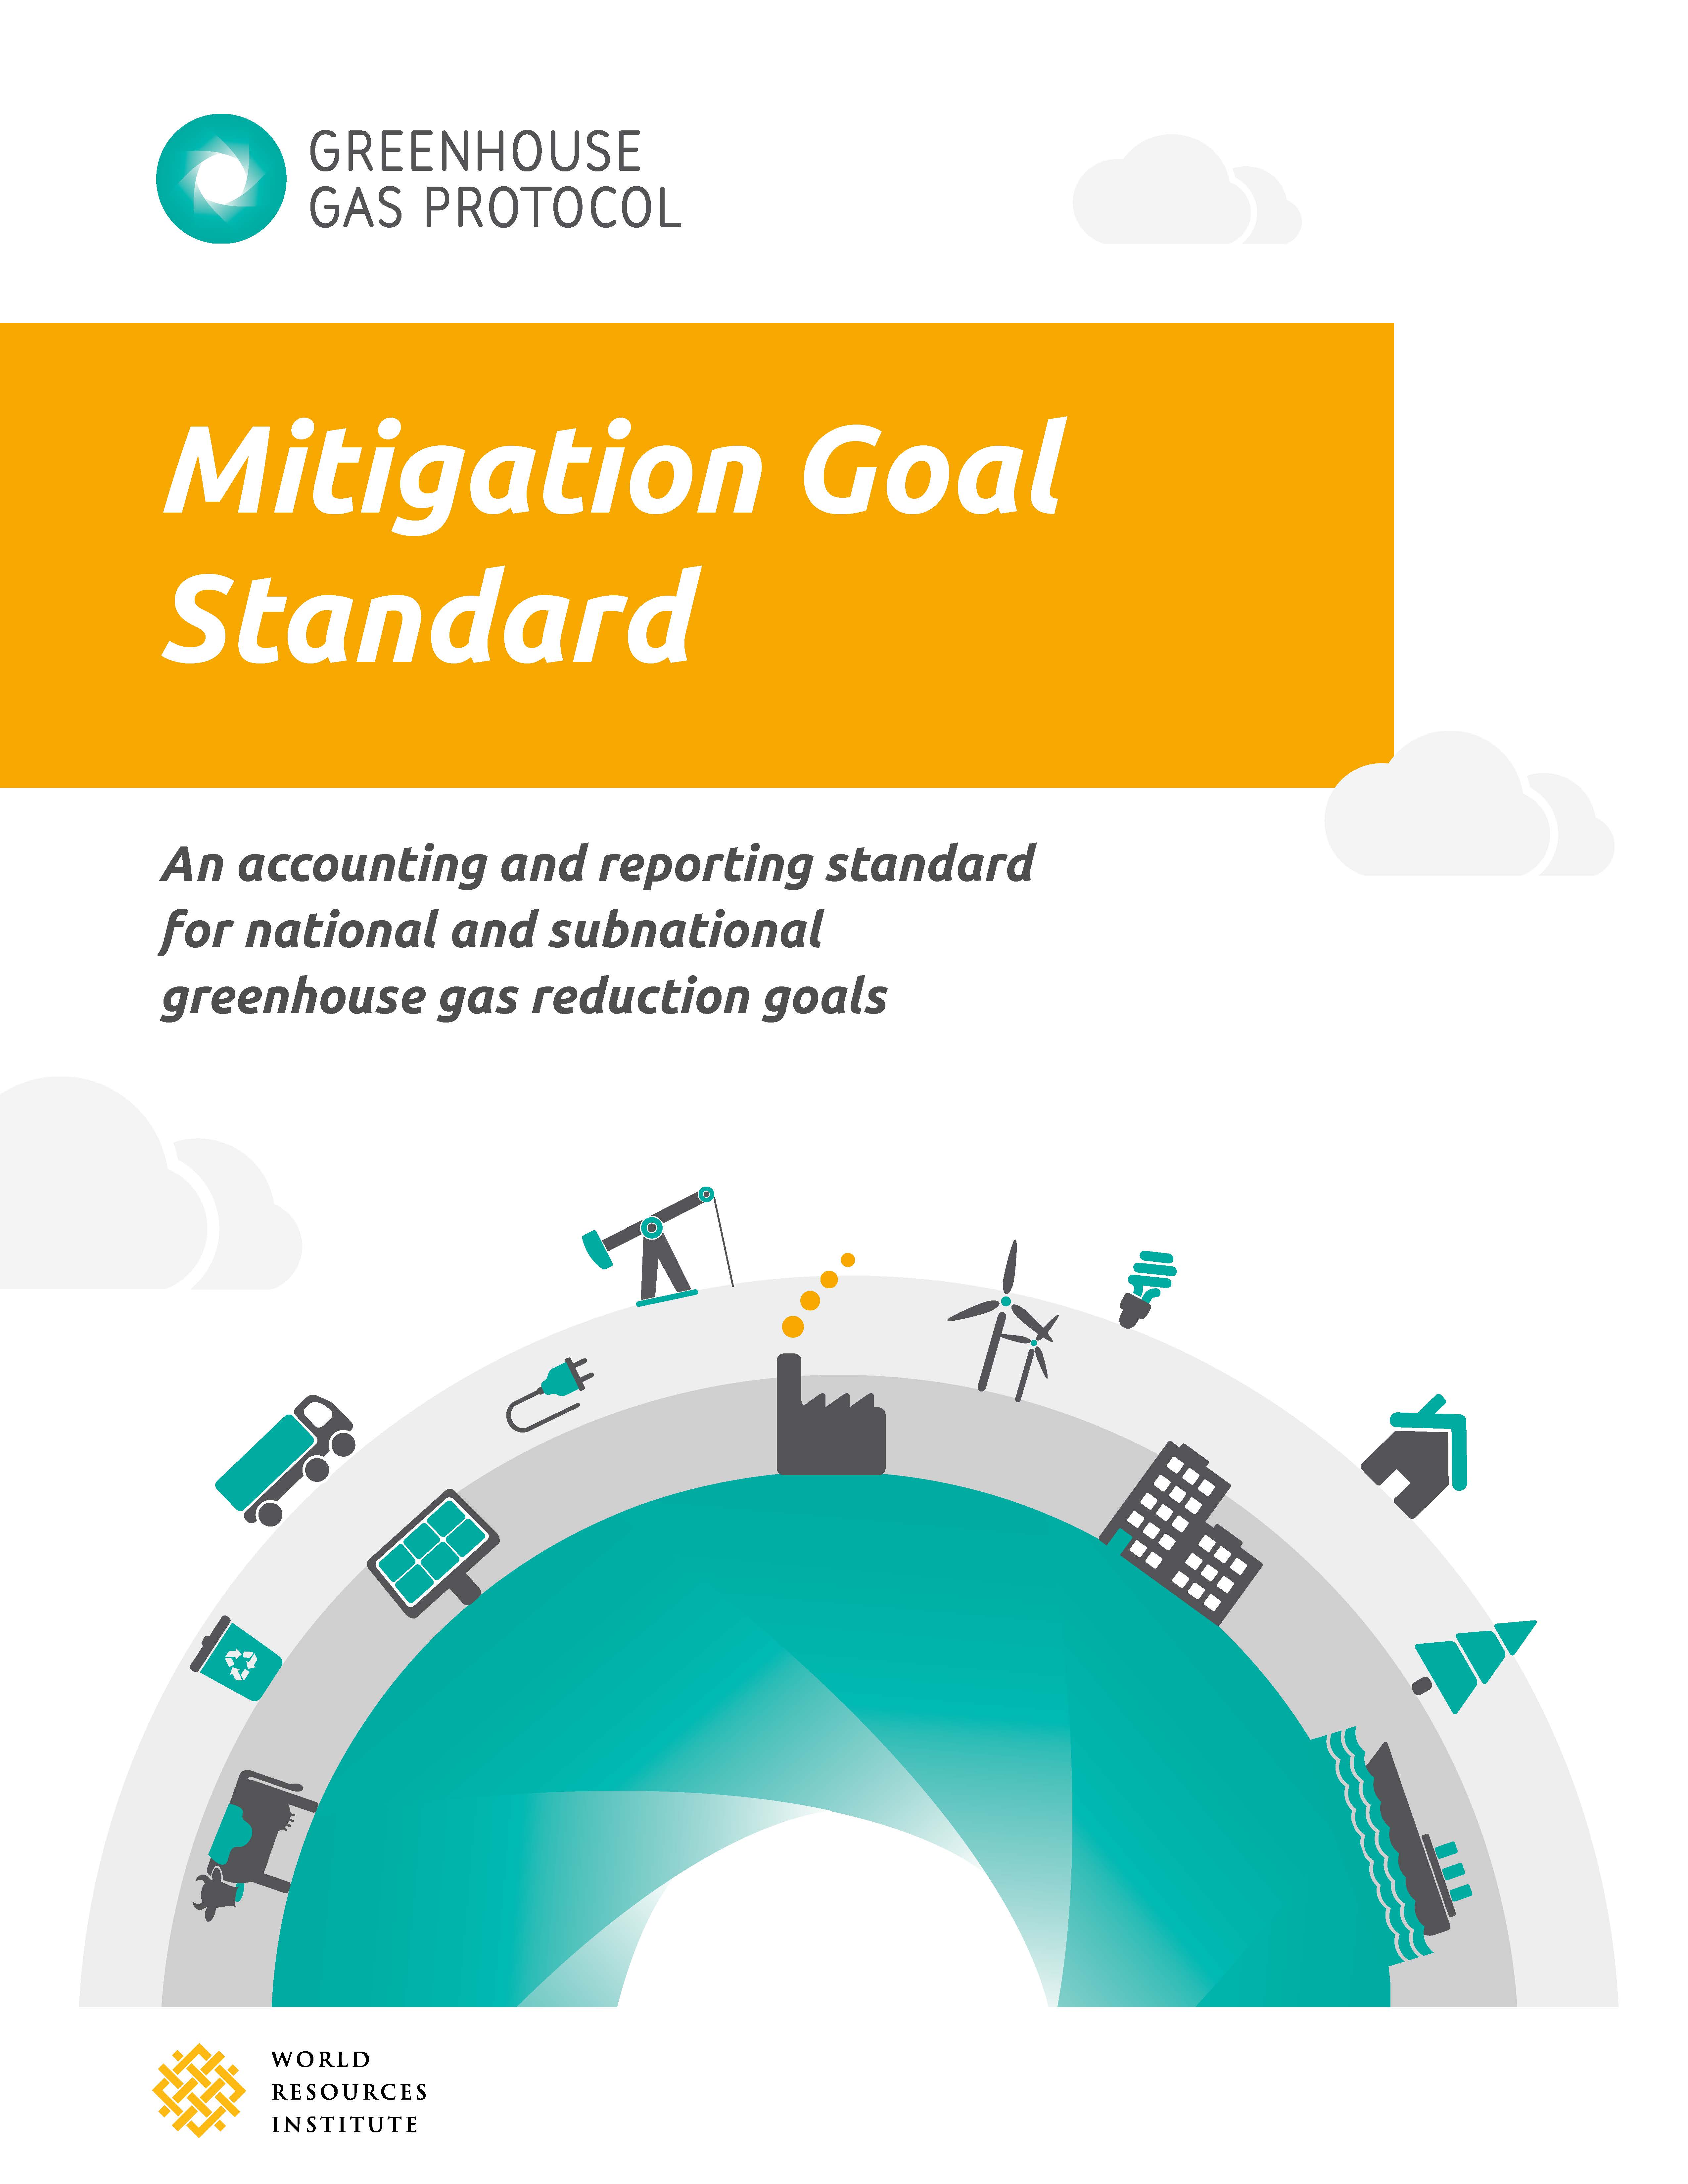 Mitigation Goal Standard: An Accounting and Reporting Standard for National and Subnational Greenhouse Gas Reduction Goals